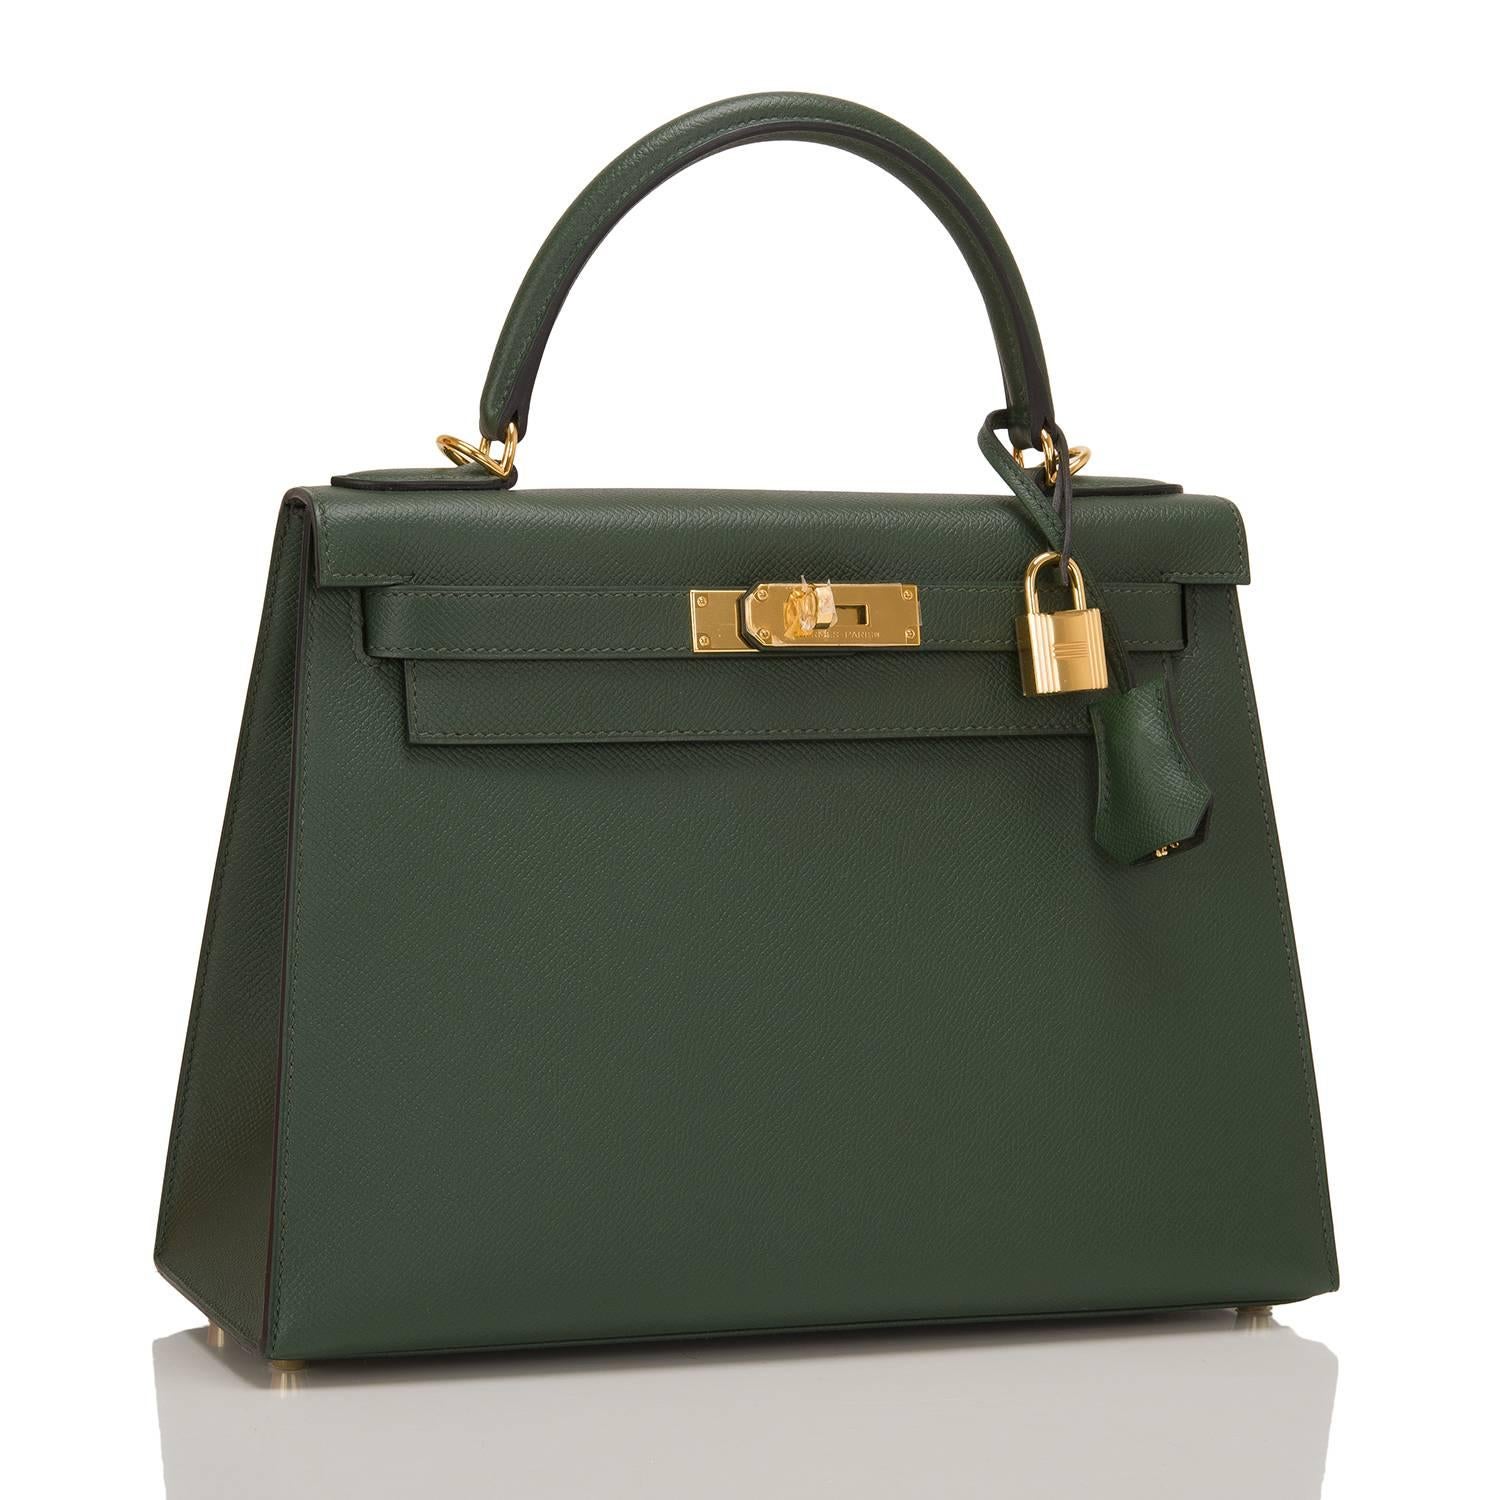 Hermes Vert Anglais Sellier Kelly 28cm in epsom leather with gold hardware.

The bag features tonal stitching, front toggle closure, clochette with lock and two keys, single rolled handle and optional shoulder strap.

The Interior is lined in